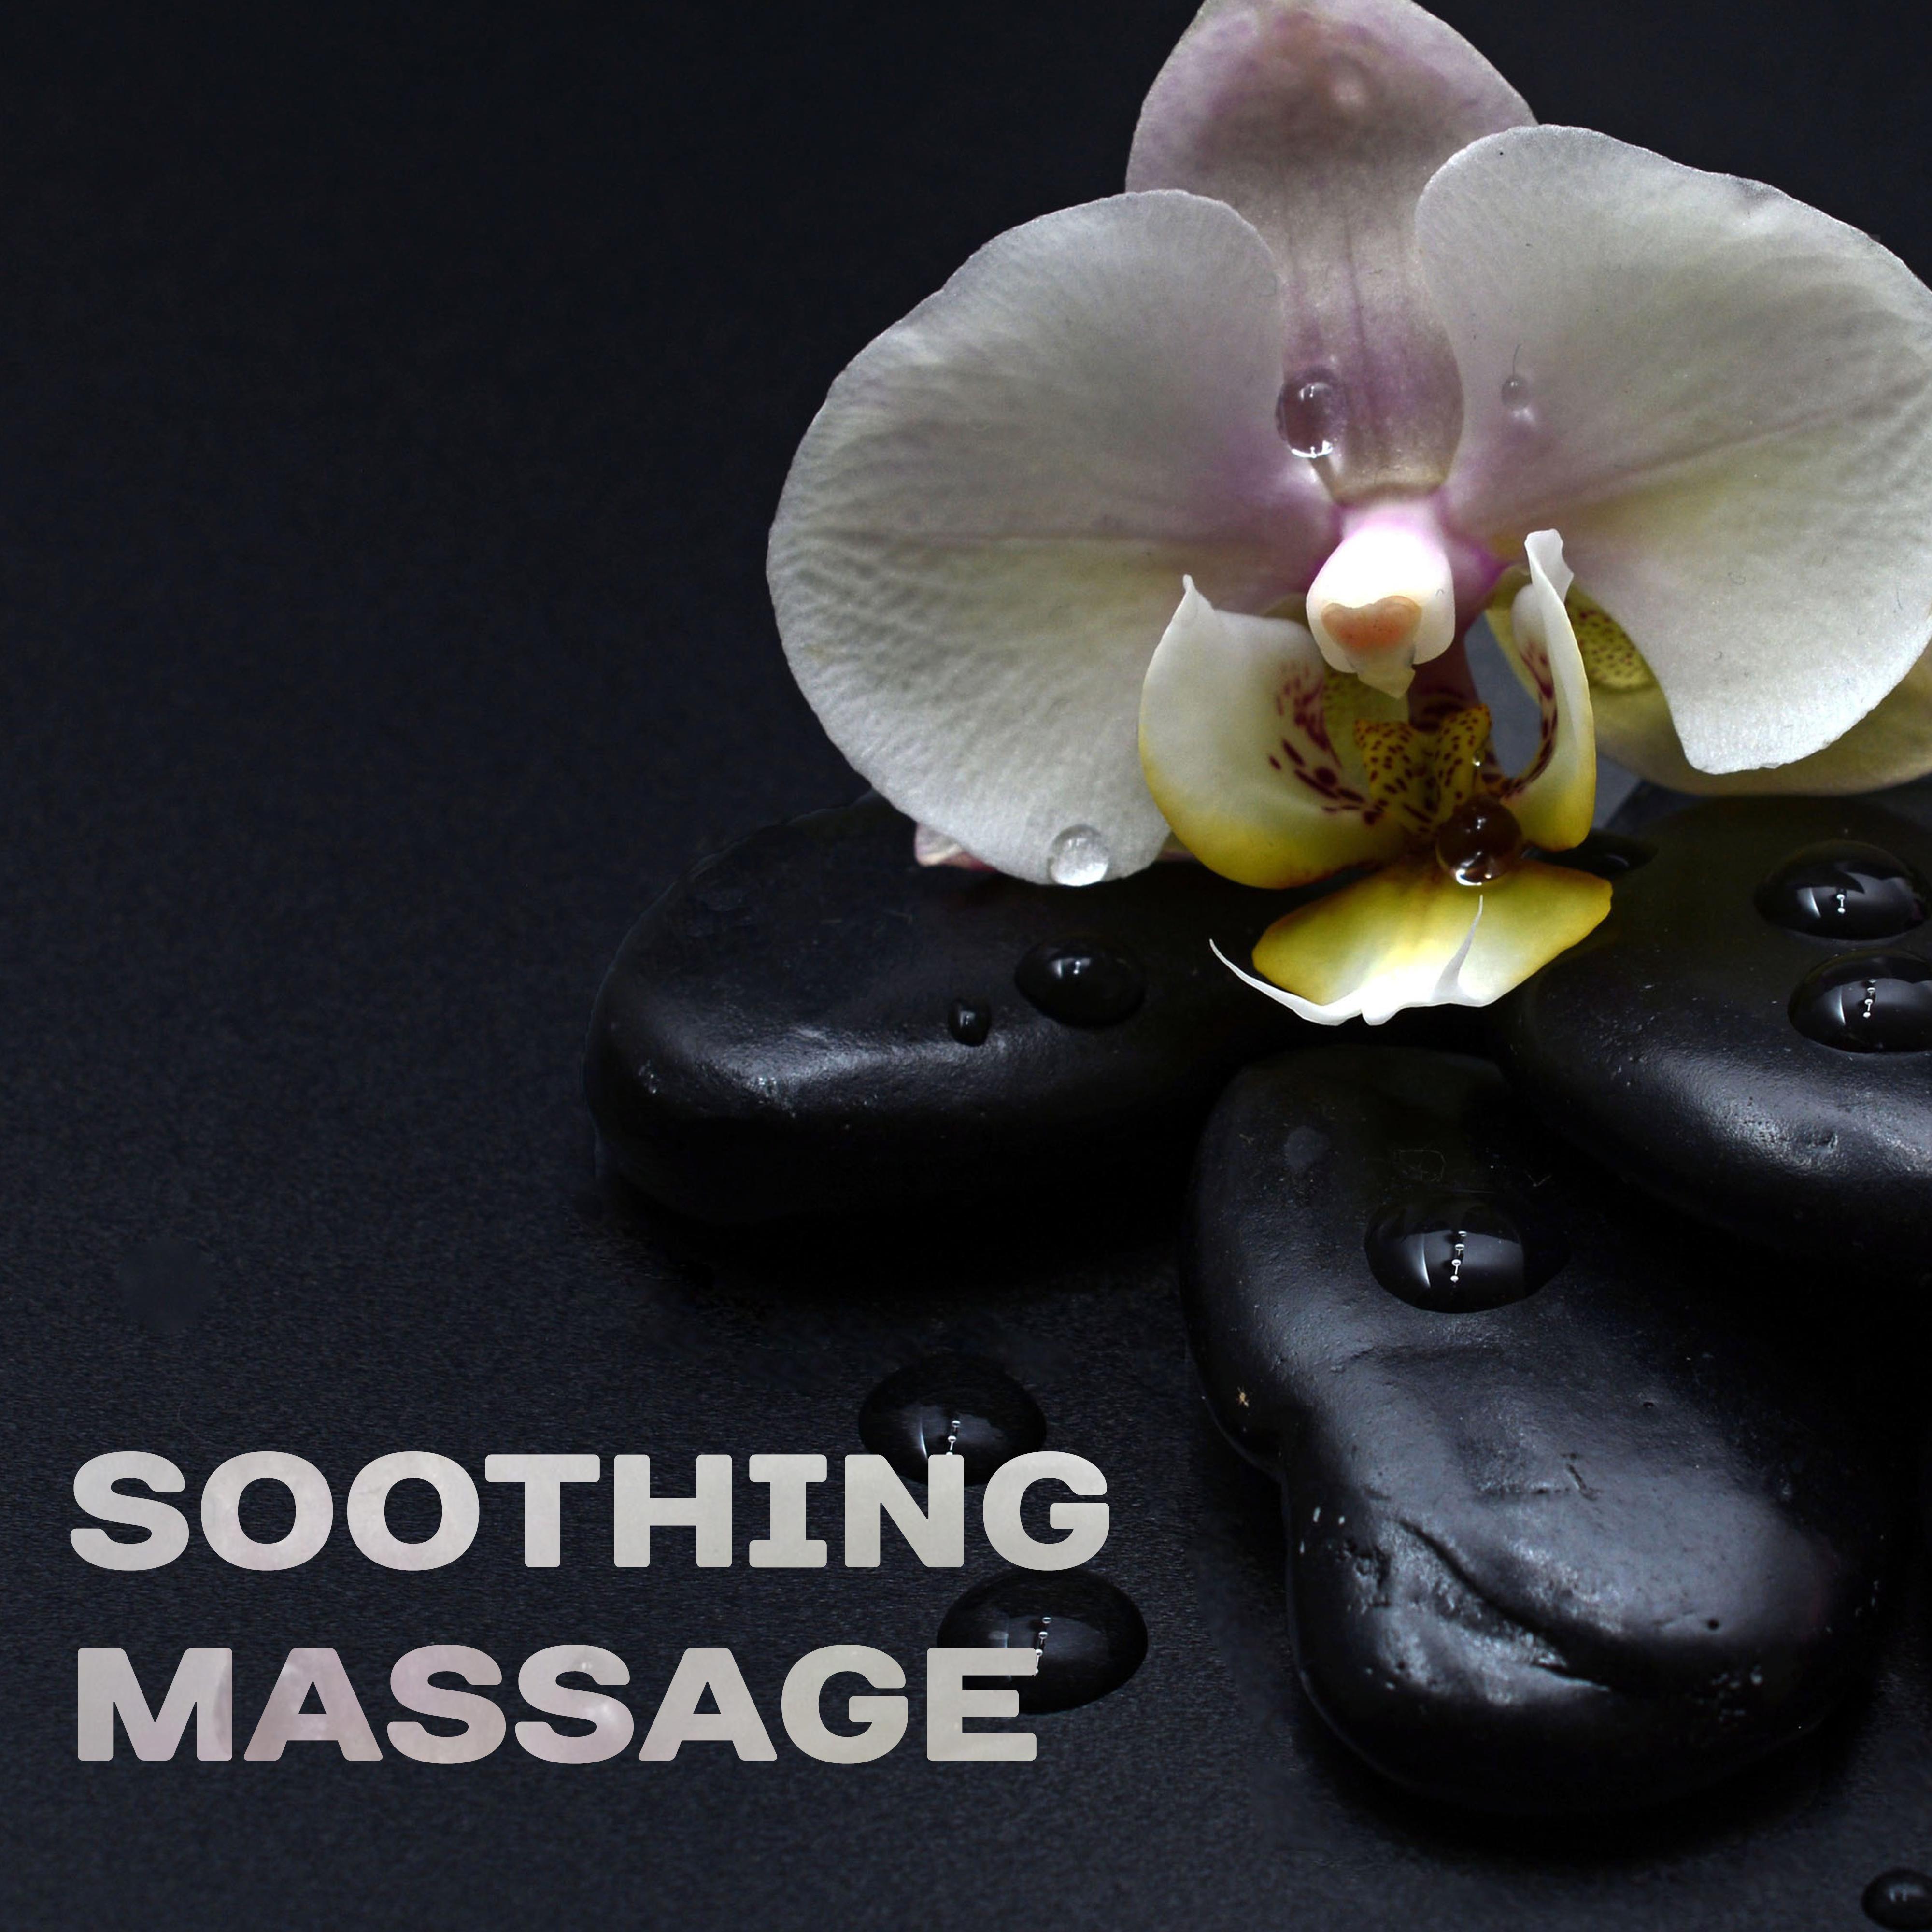 Soothing Massage  Healing Nature, Spa Music, Wellness, Relax, Anti Stress Songs, Pure Relaxation, Mind Calmness, Harmony